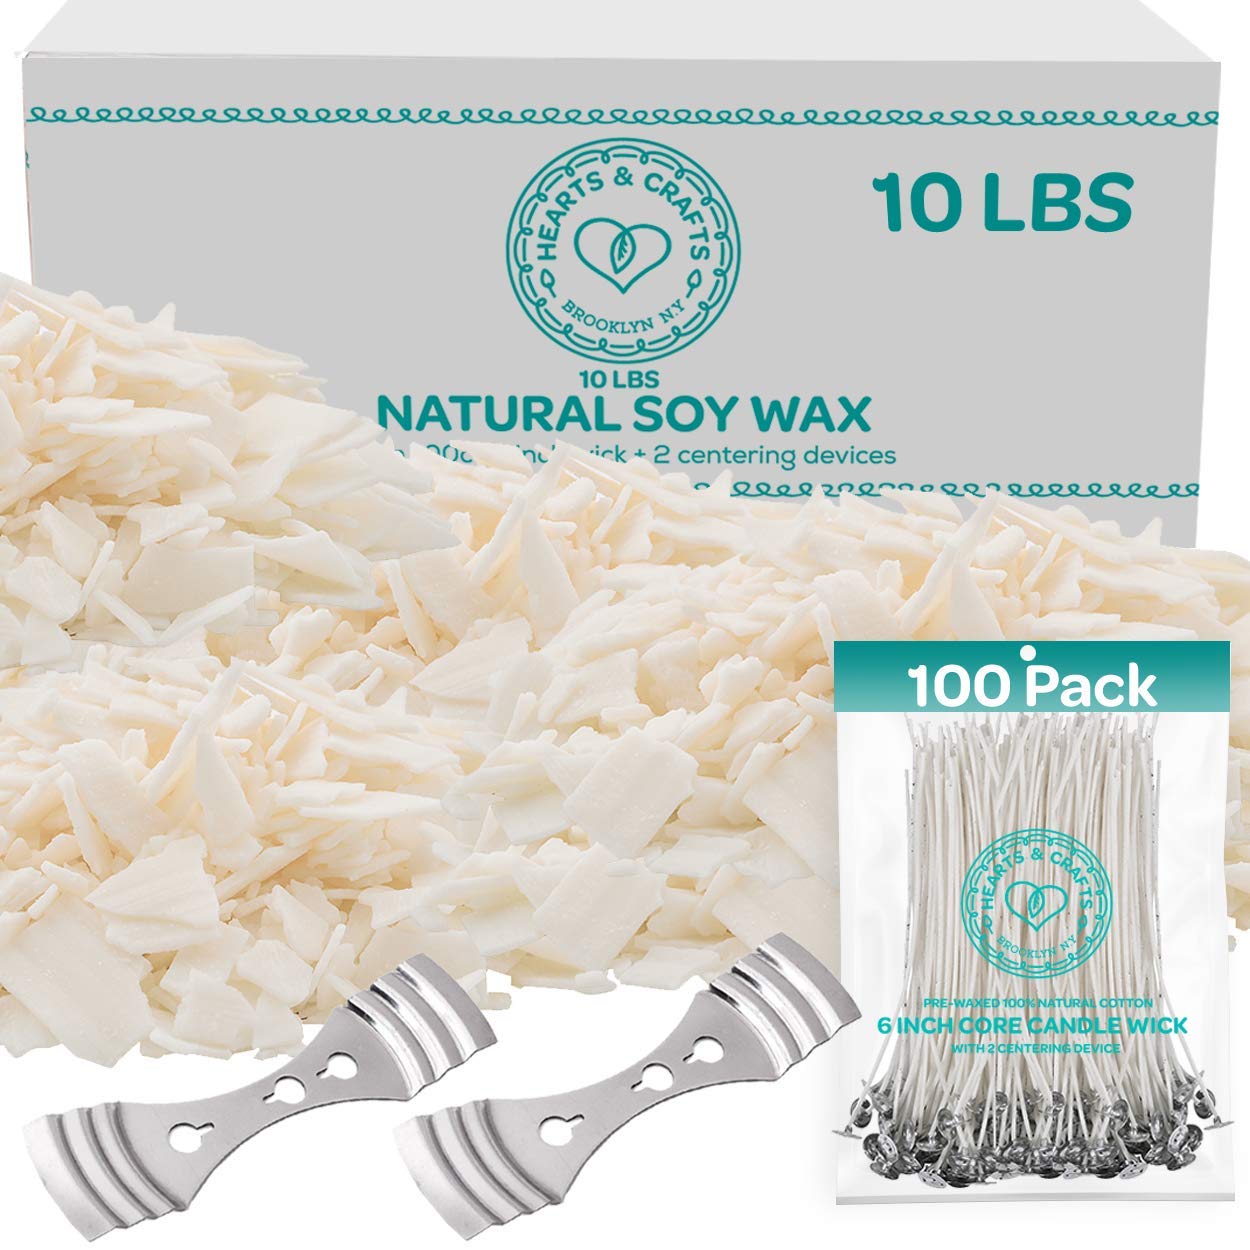 Hearts & Crafts Natural Soy Wax - Candle Making Wax Supplies - 4.5kg Soy Wax, 100 15cm Pre-Waxed Candle Wicks, & 2 Metal Centering Devices - Soy Wax Flakes for Candle Making - Soy Candle Wax Bulk  - Very Good